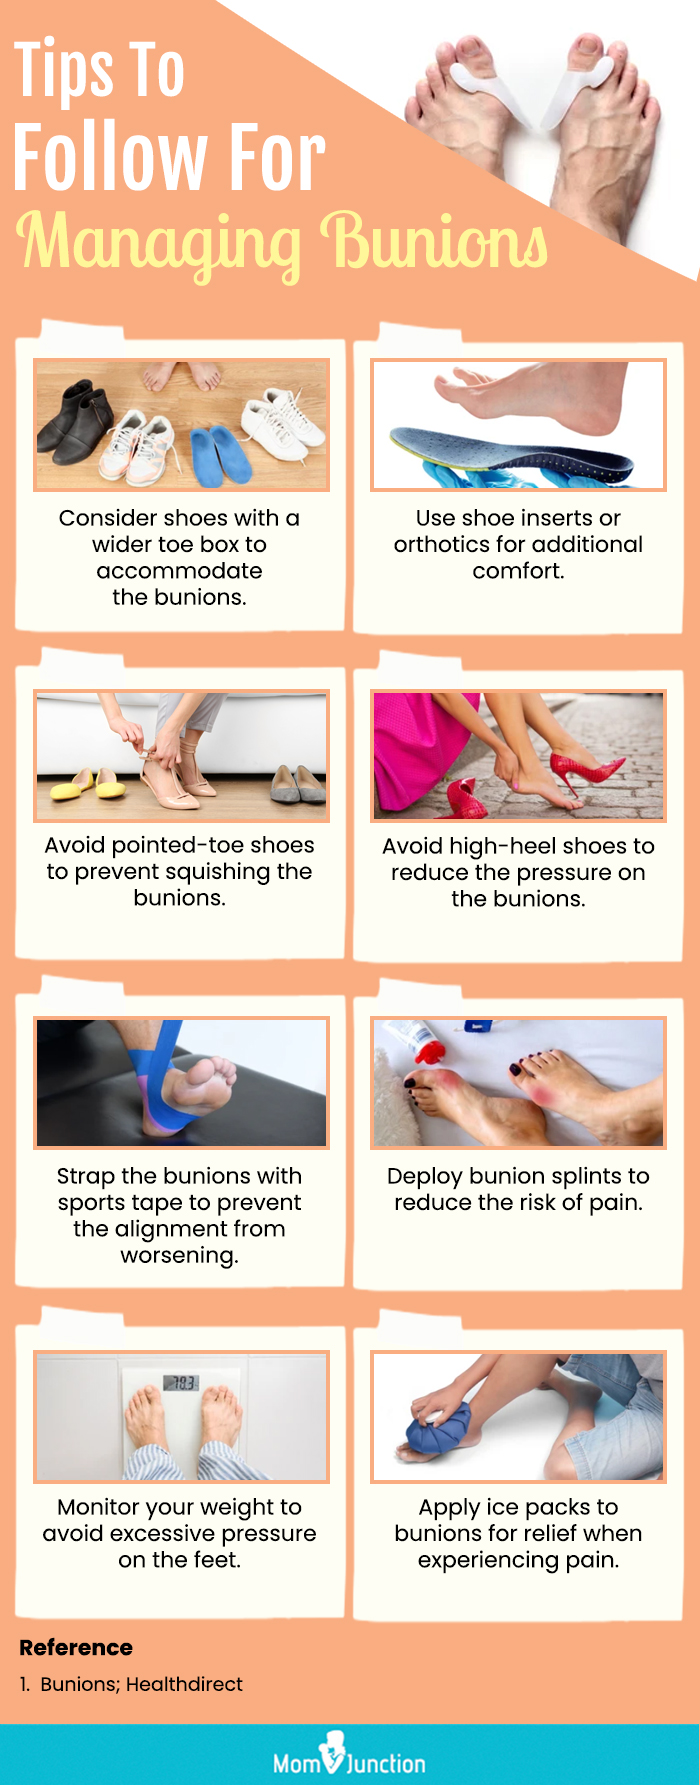 Tips To Follow For Managing Bunions (infographic)